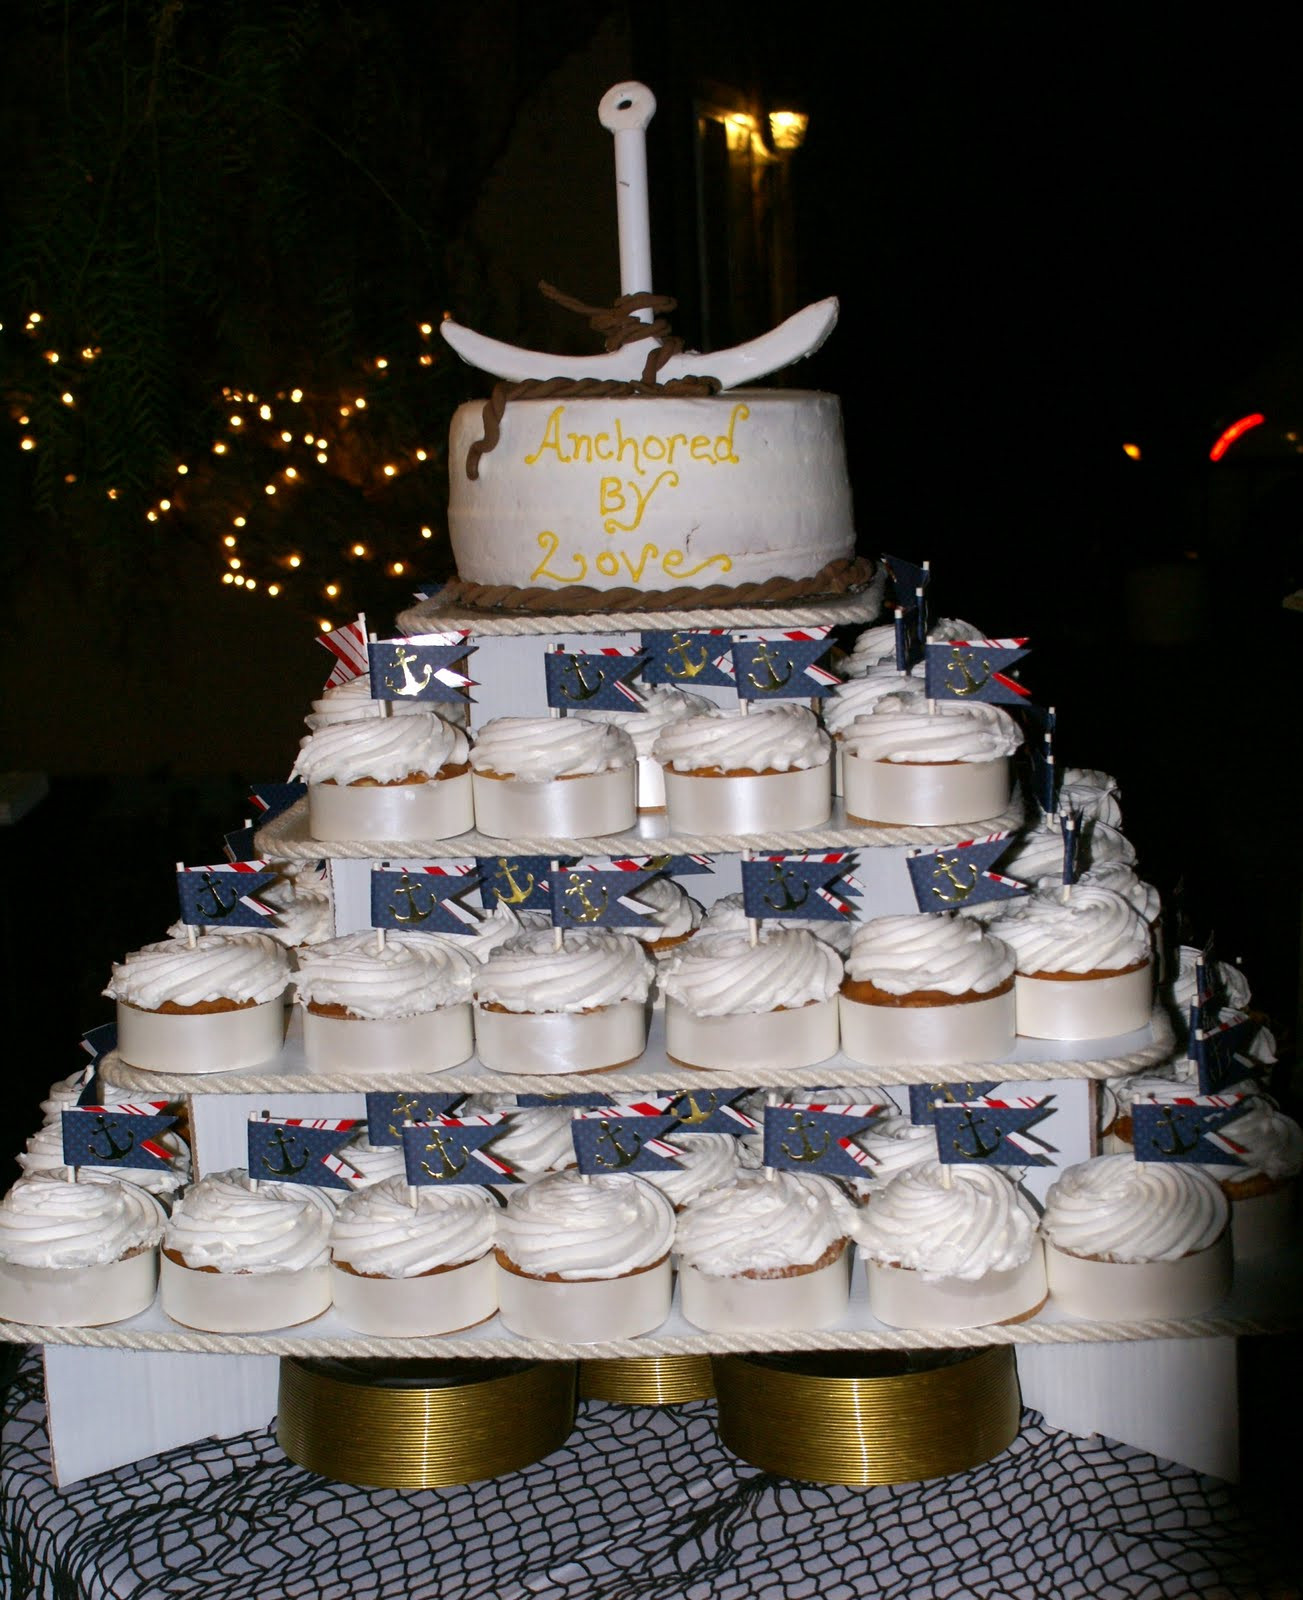 Costco Wedding Cakes Designs
 When you purchase Costco bakery wedding cakes takes after